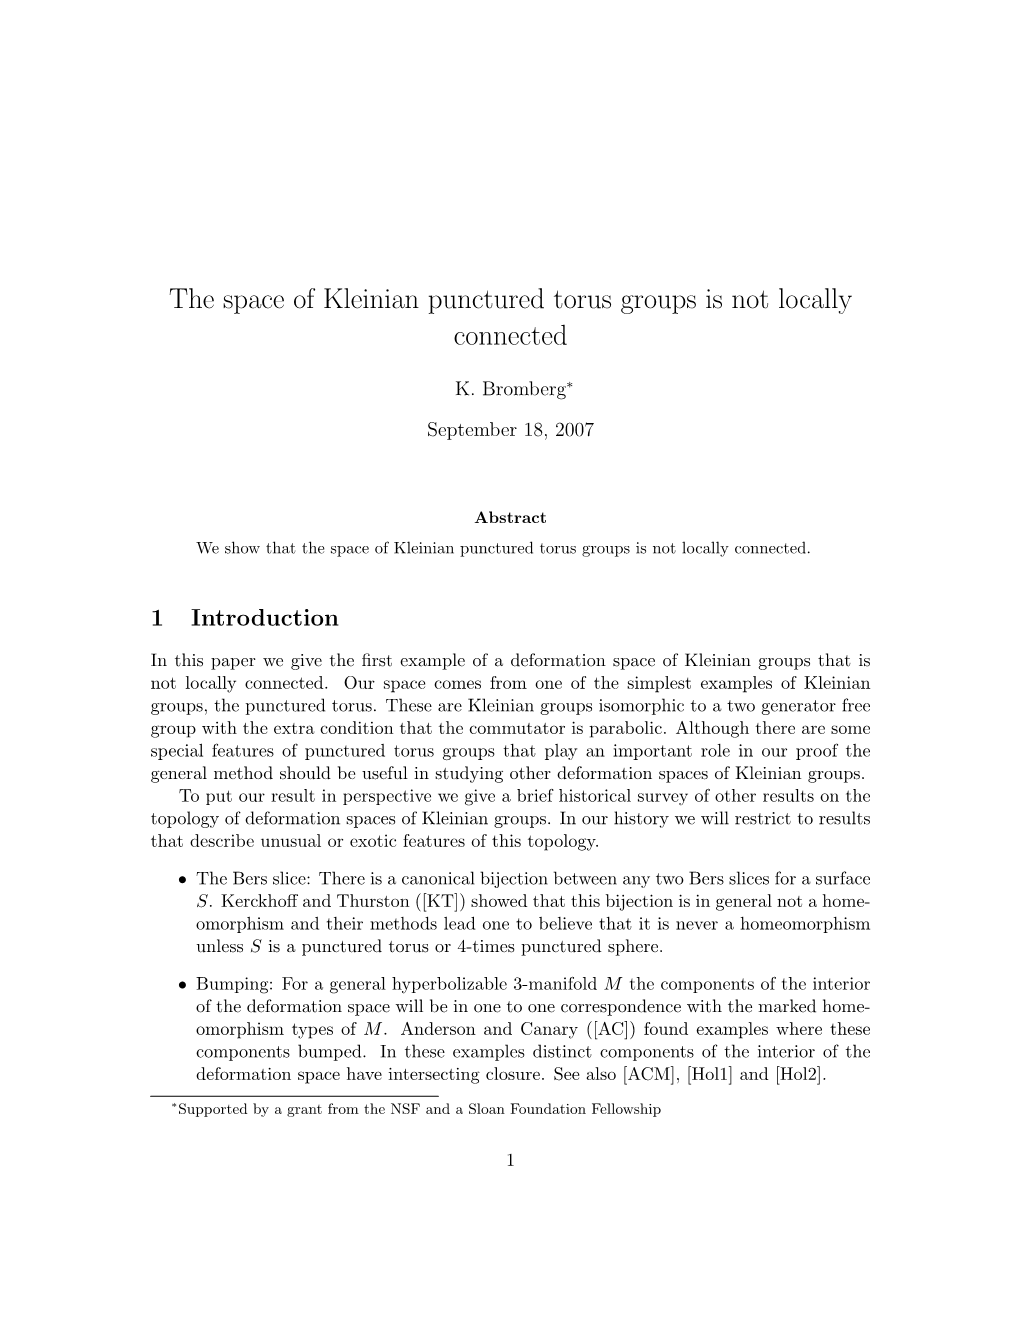 The Space of Kleinian Punctured Torus Groups Is Not Locally Connected